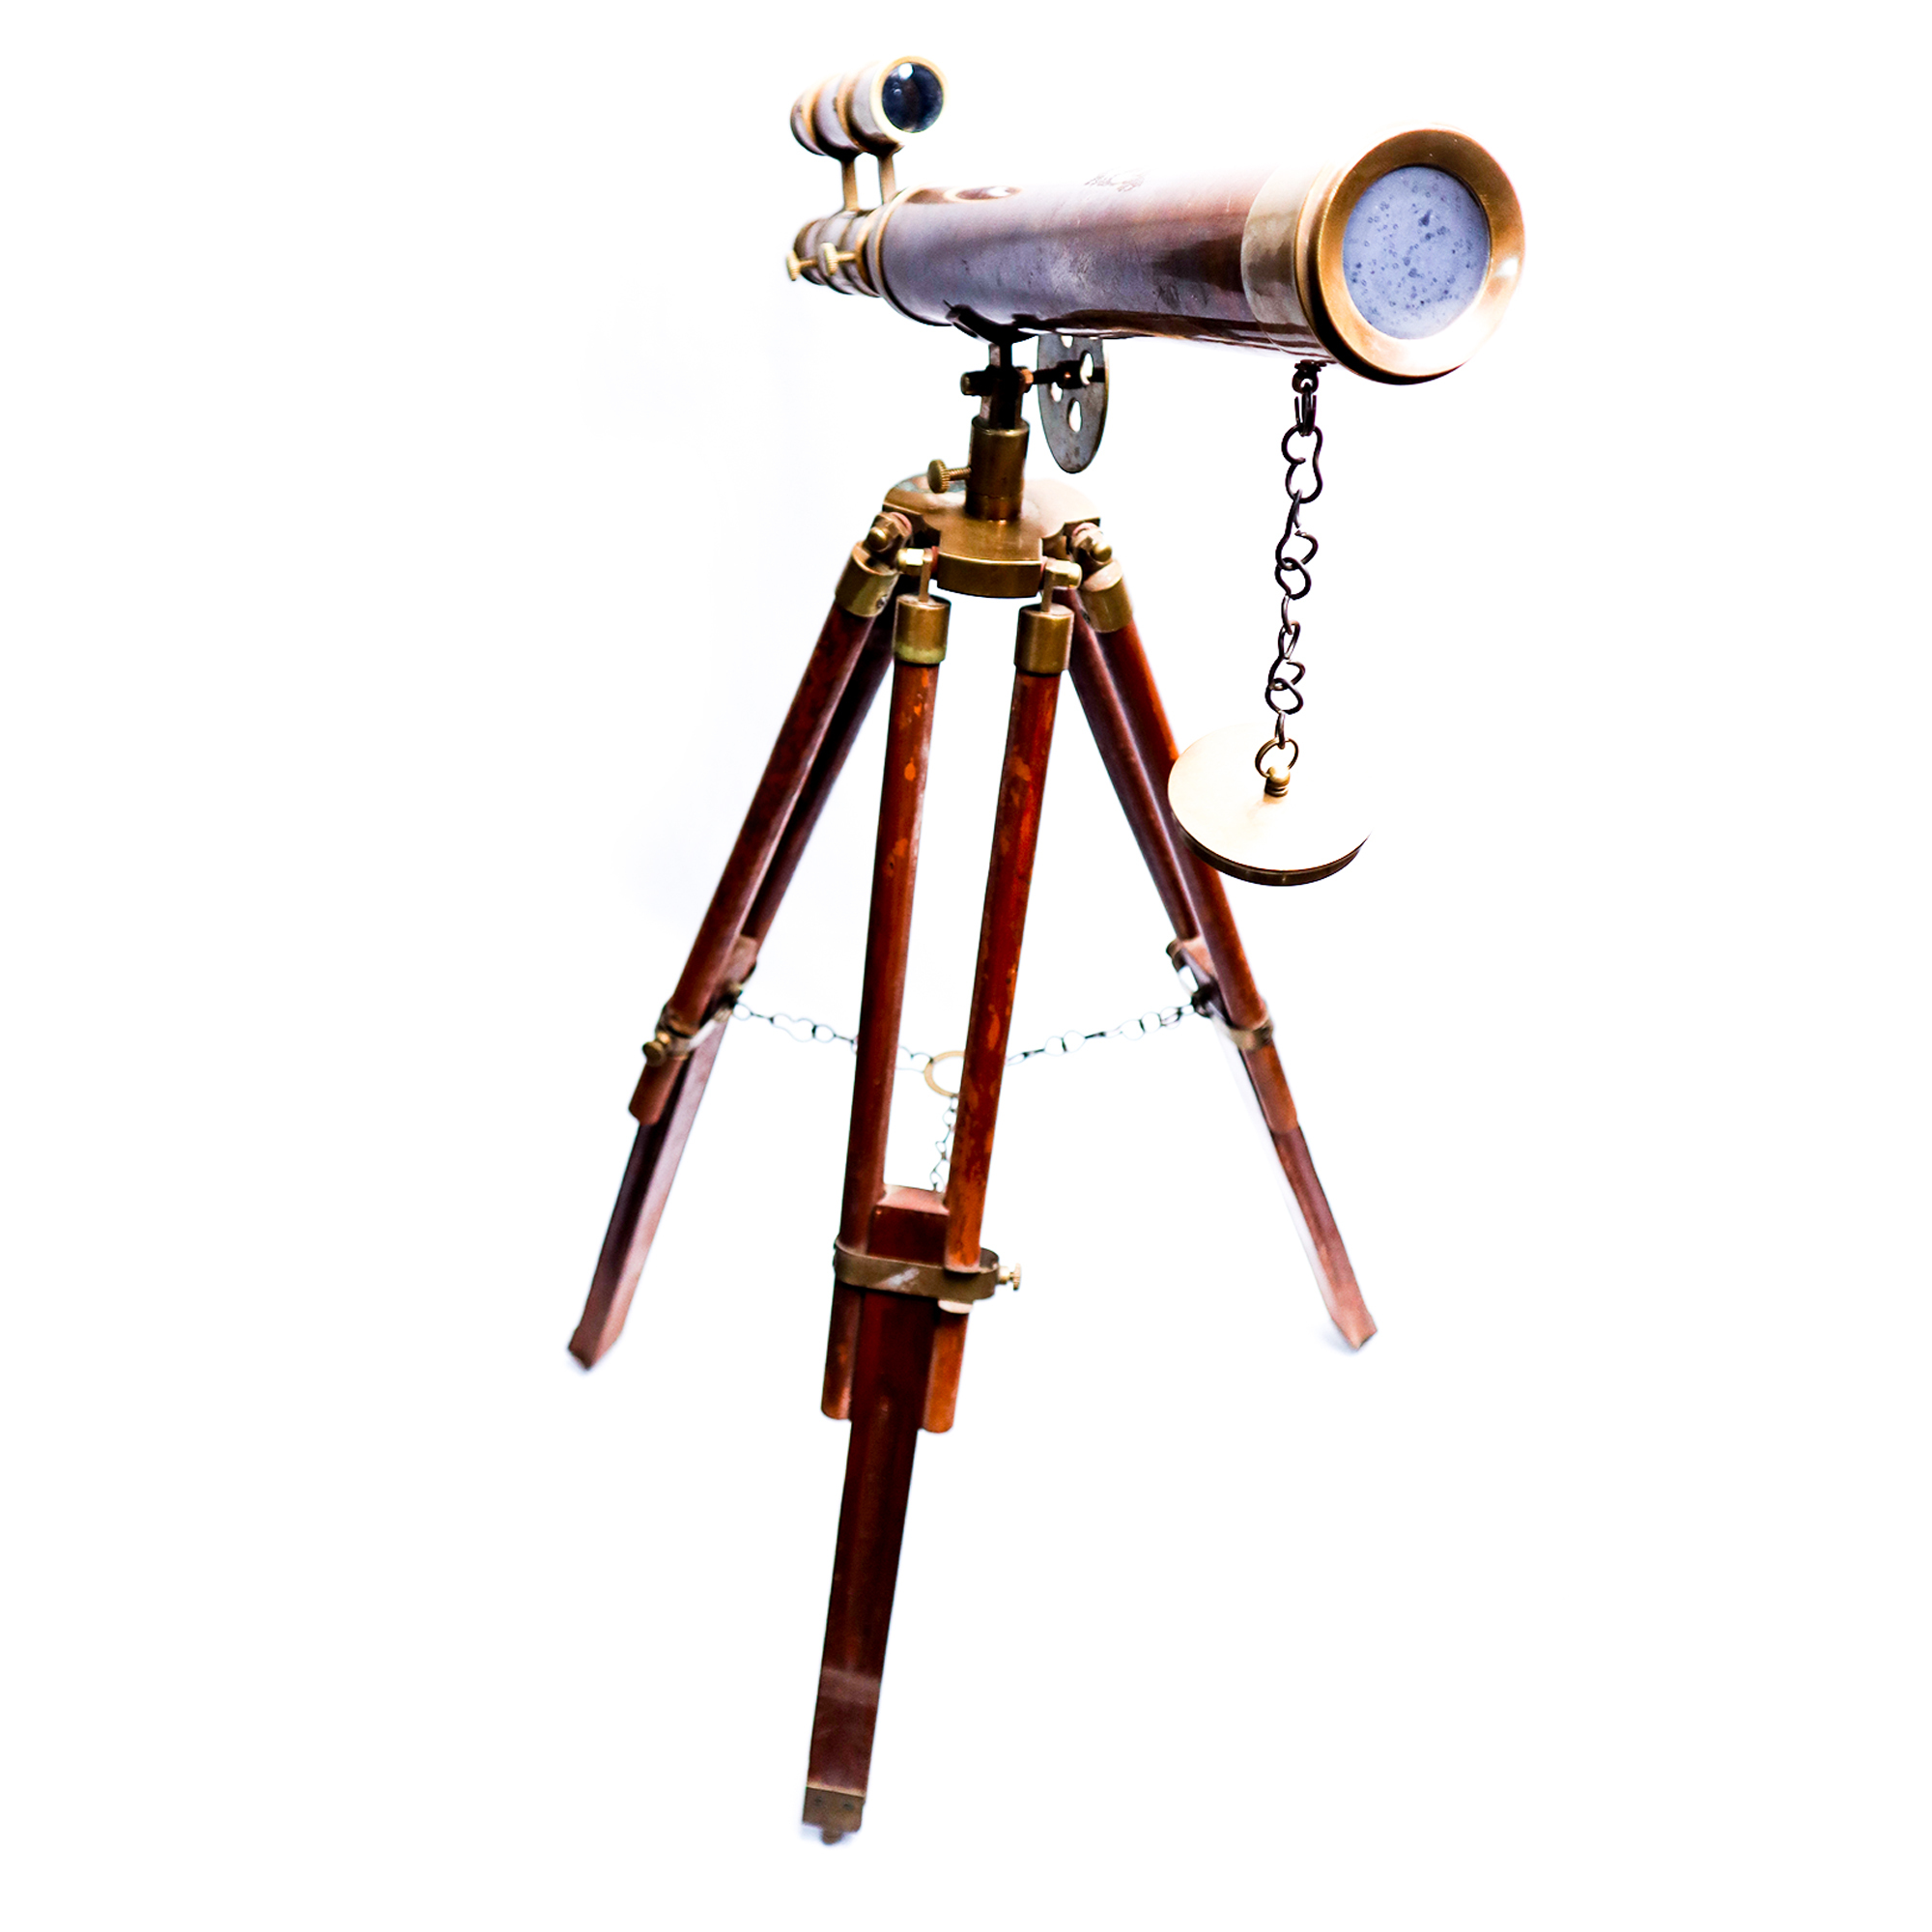 Antique Finish Double Barrel Brass Telescope with Tripod Stand